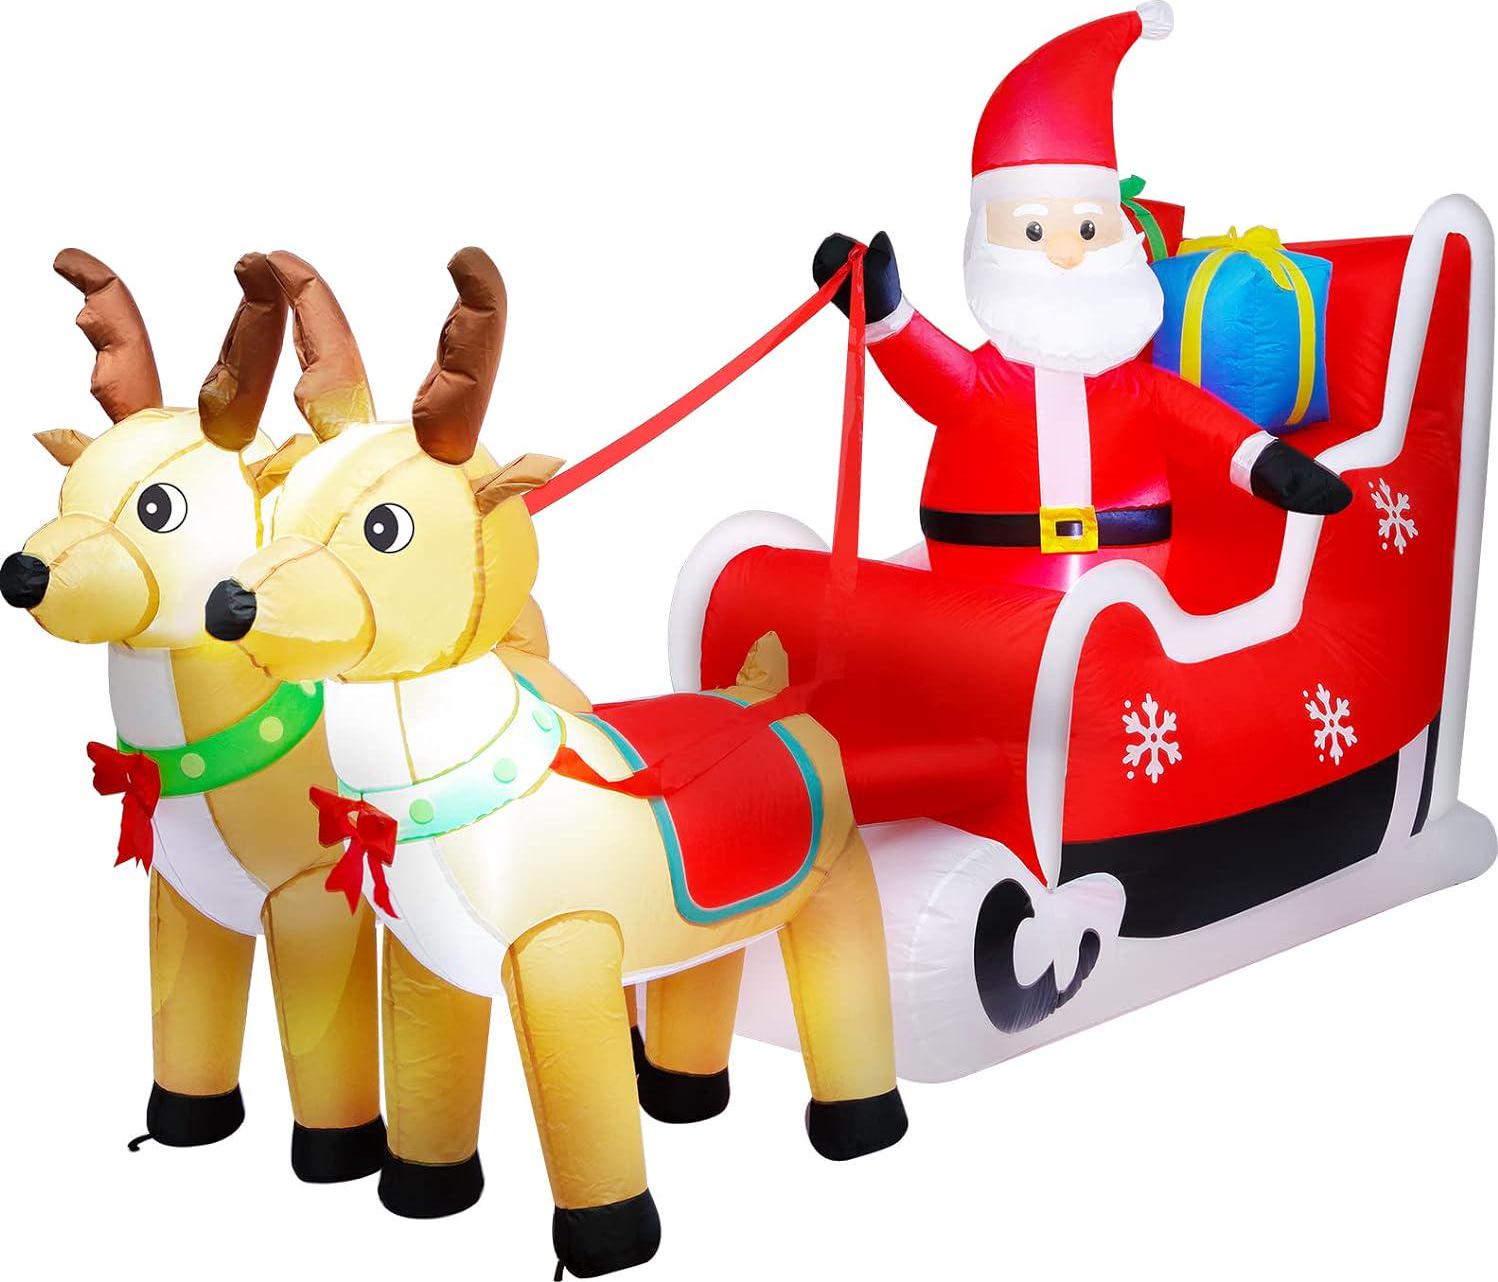 ASTEROUTDOOR 8ft Christmas Inflatable Decorations Outdoor Claus on Sleigh with Two Blow Up Built-in LED Indoor Yard Decor Lighted for Holiday Season, Quick Air Blown, 8 Feet Long, Santa w/Reindeer